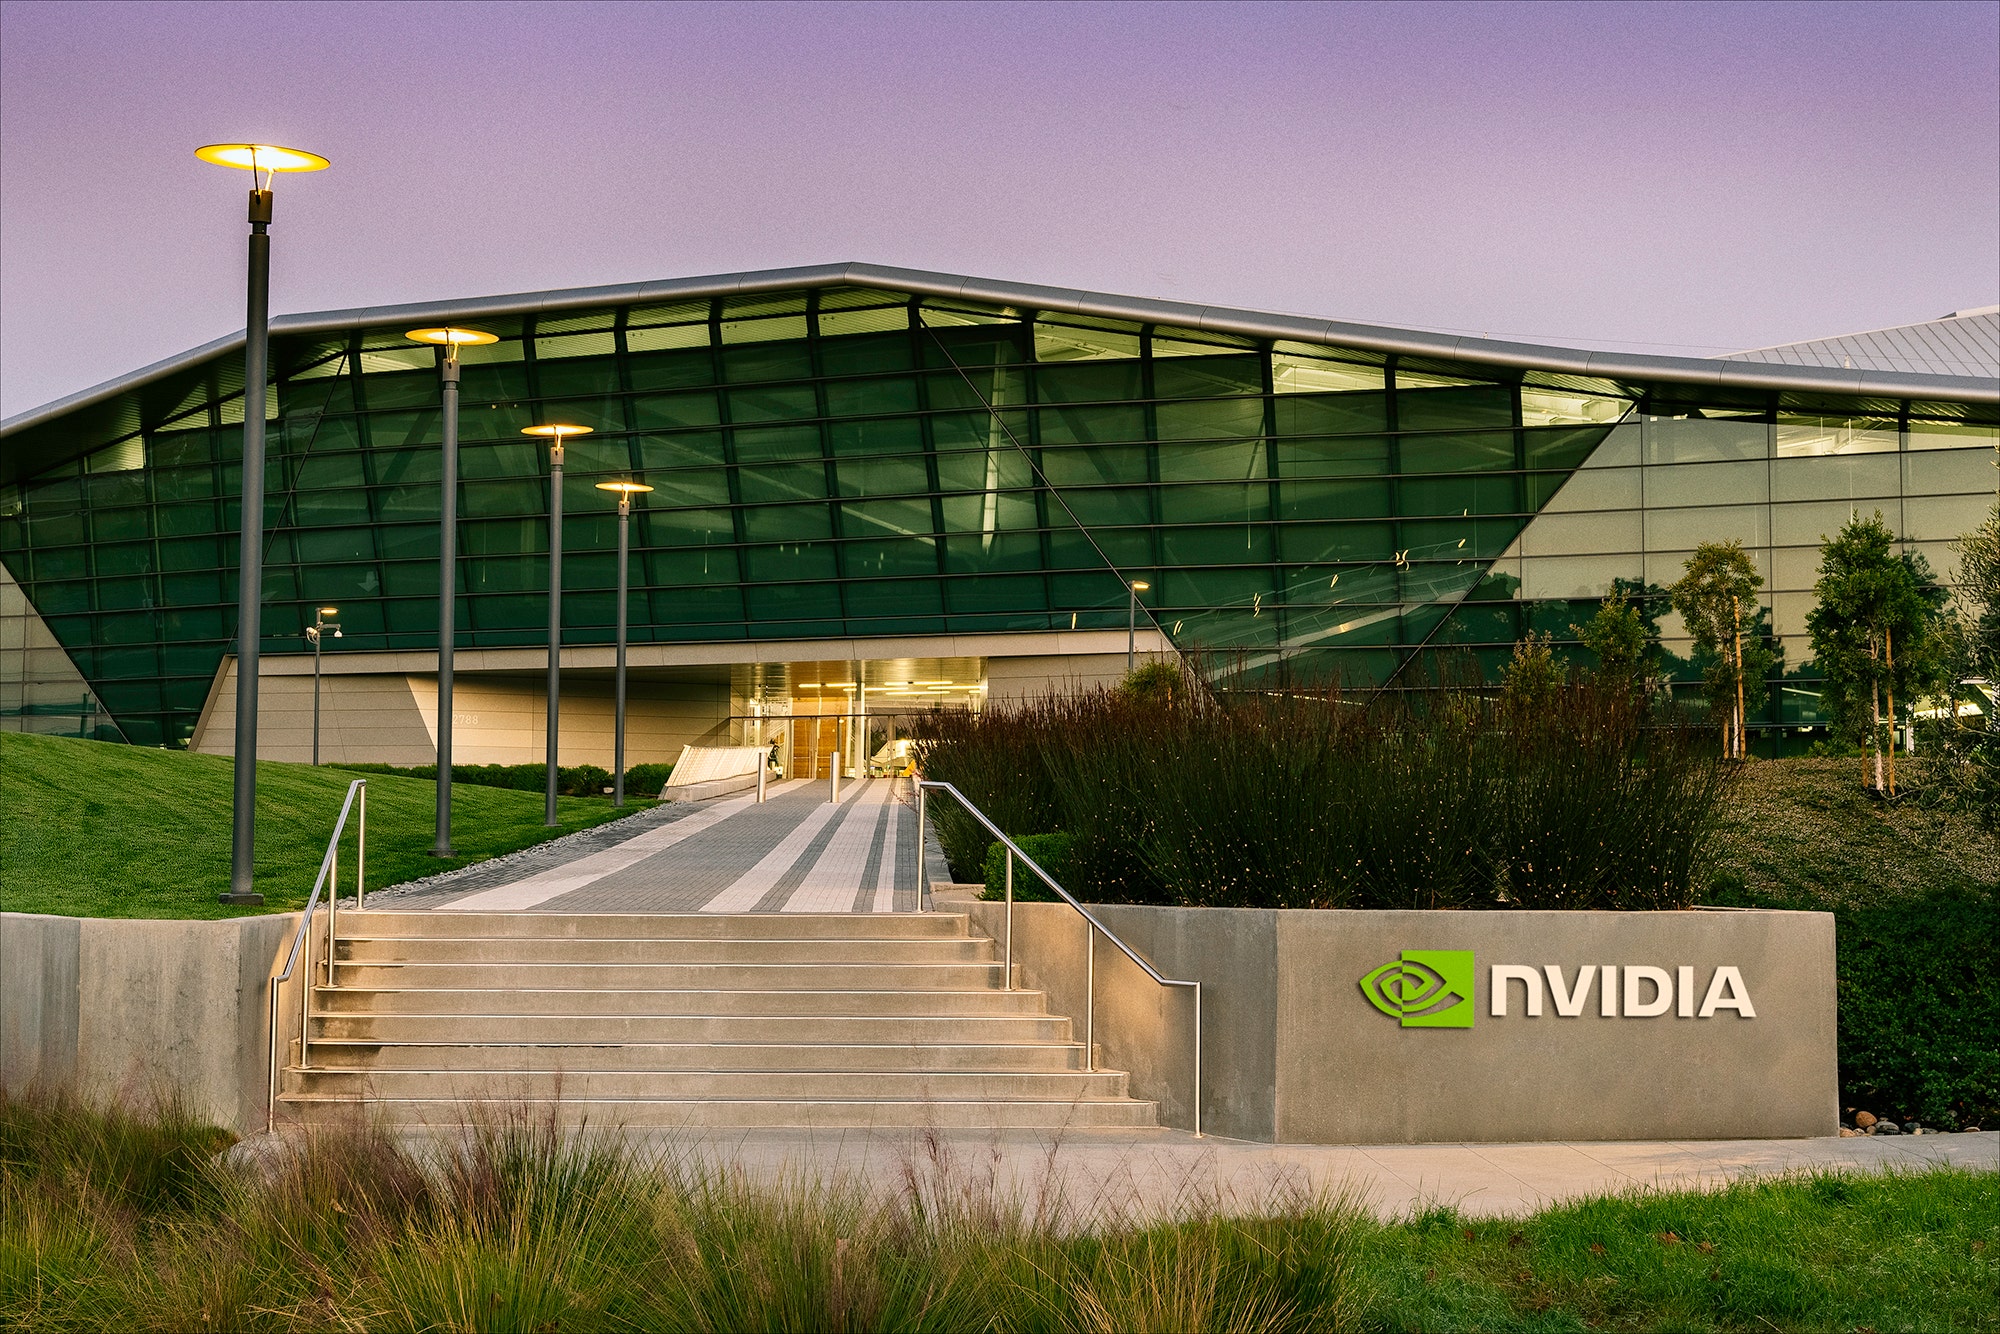 Why Nvidia Bulls Laud The Stock As 'Tough Not To Own' After Q4 Print